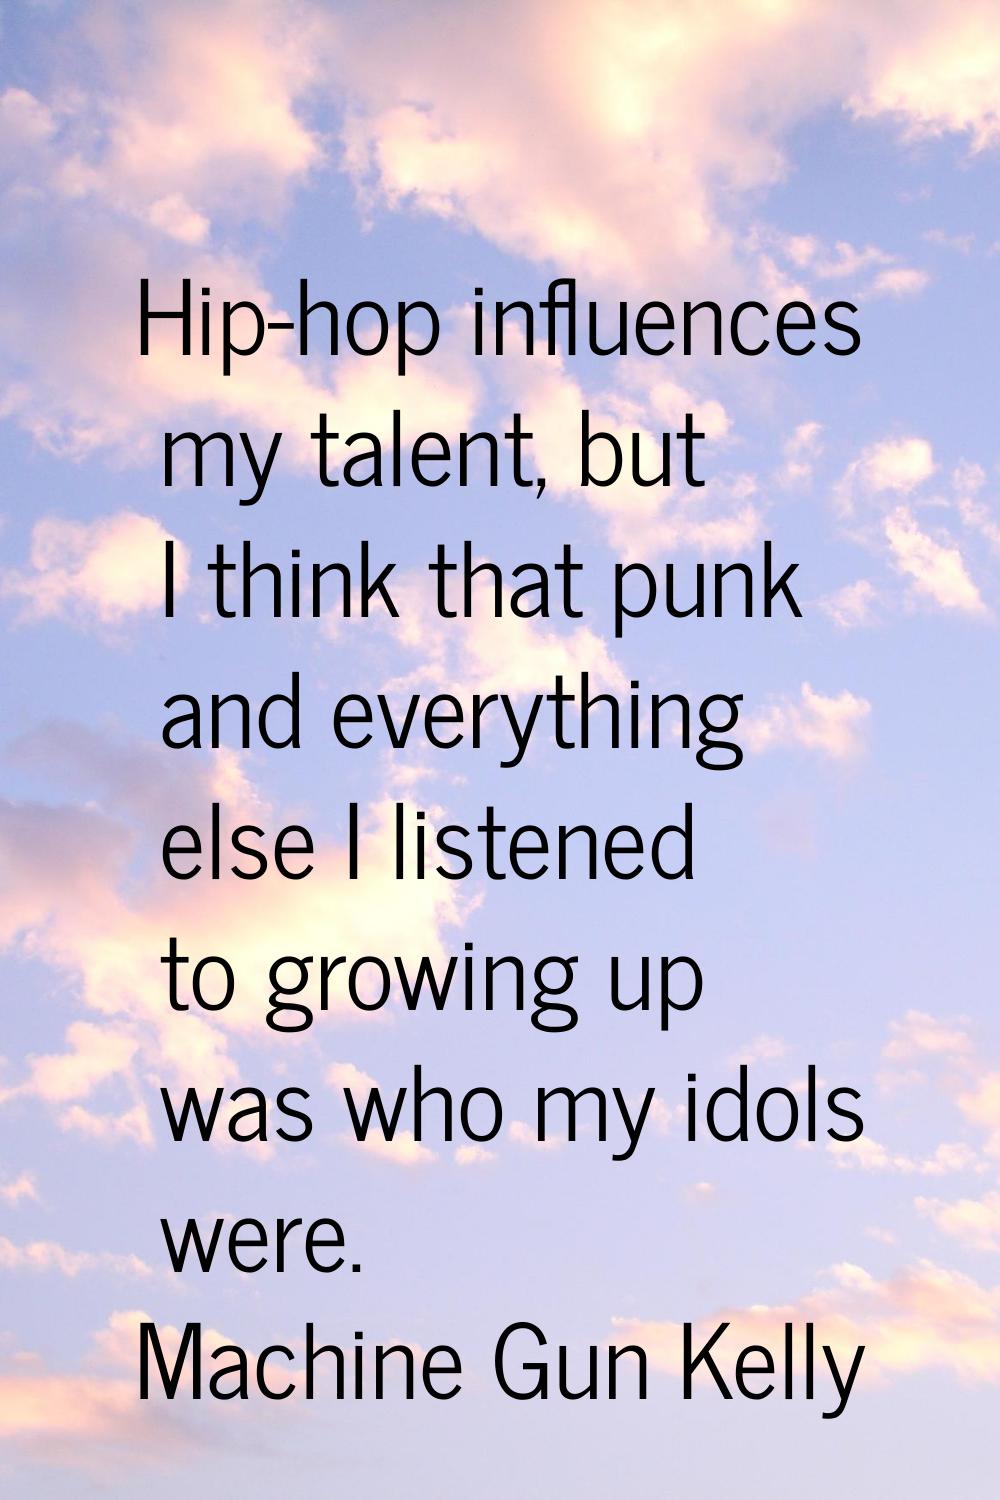 Hip-hop influences my talent, but I think that punk and everything else I listened to growing up wa